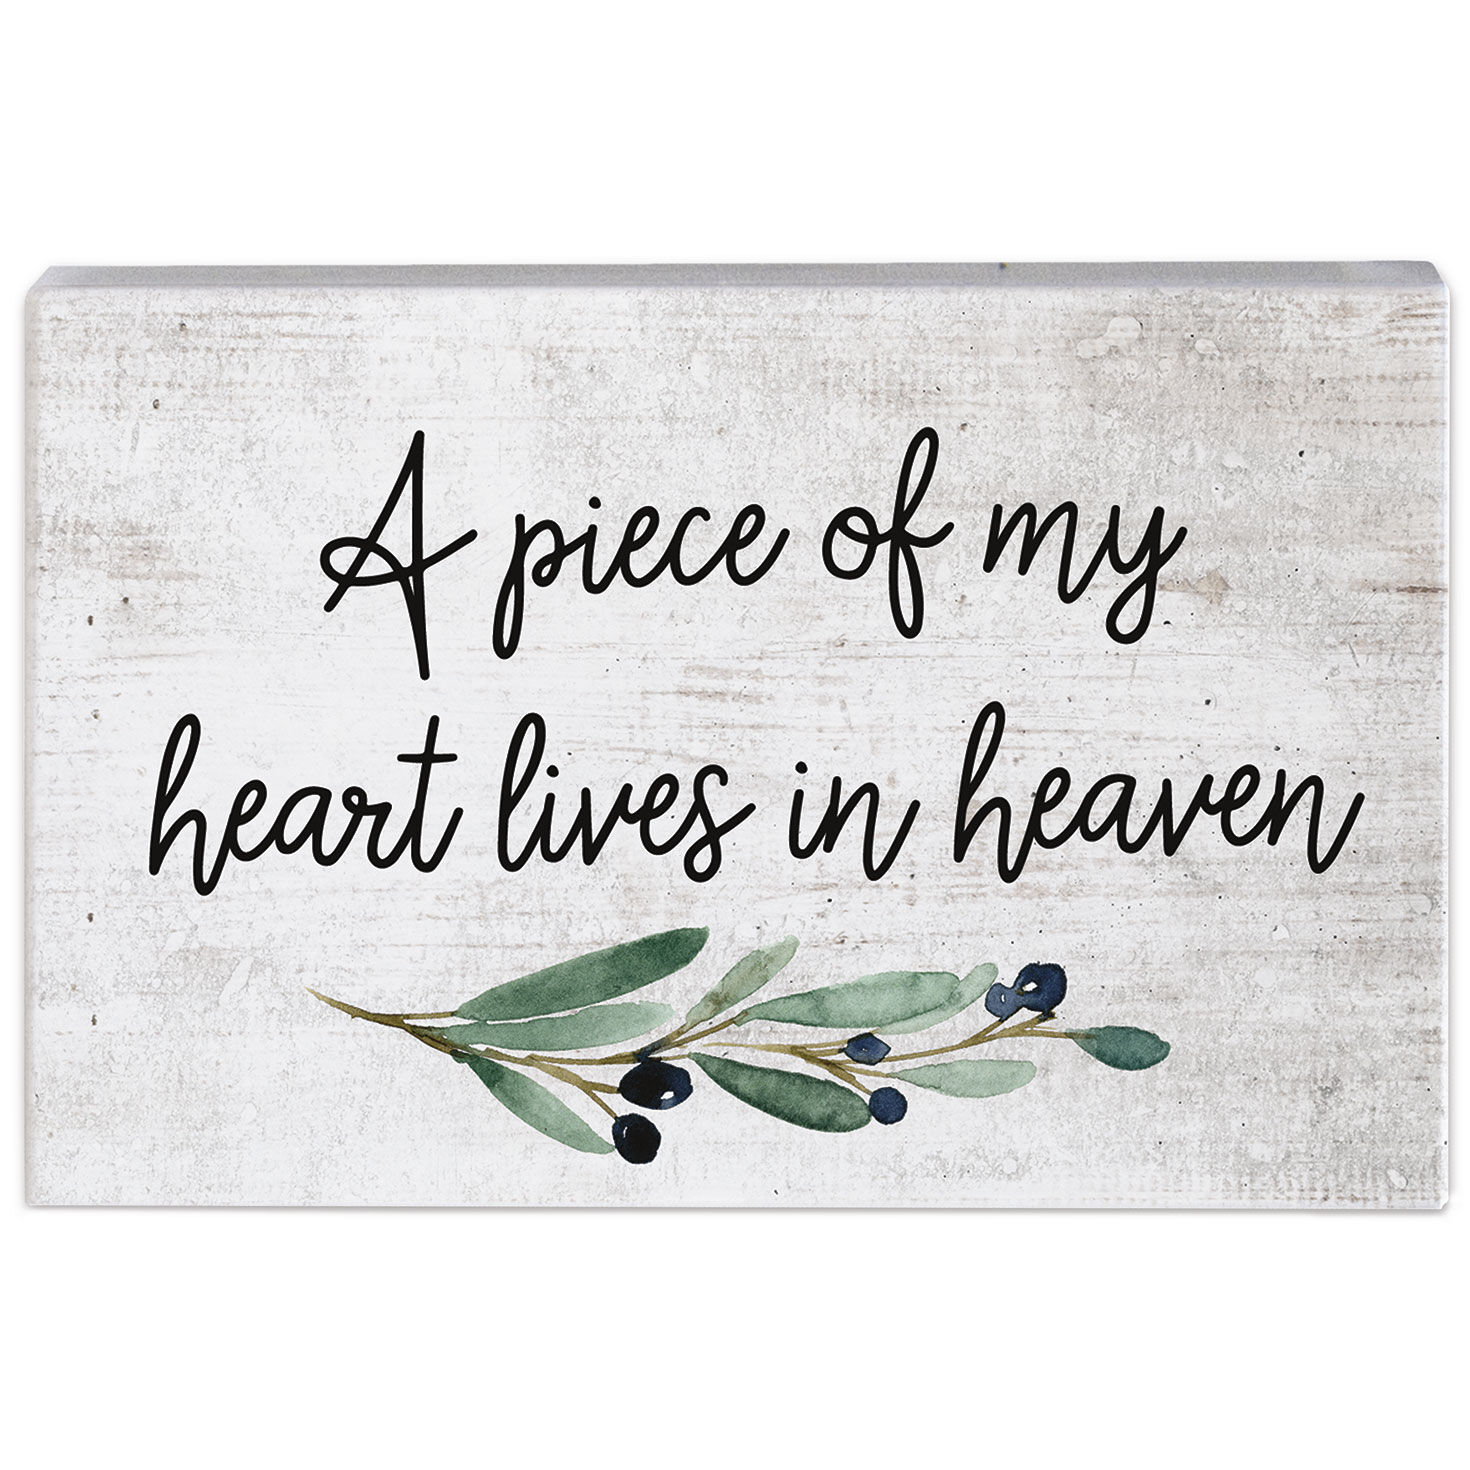 quotes about a loved one in heaven